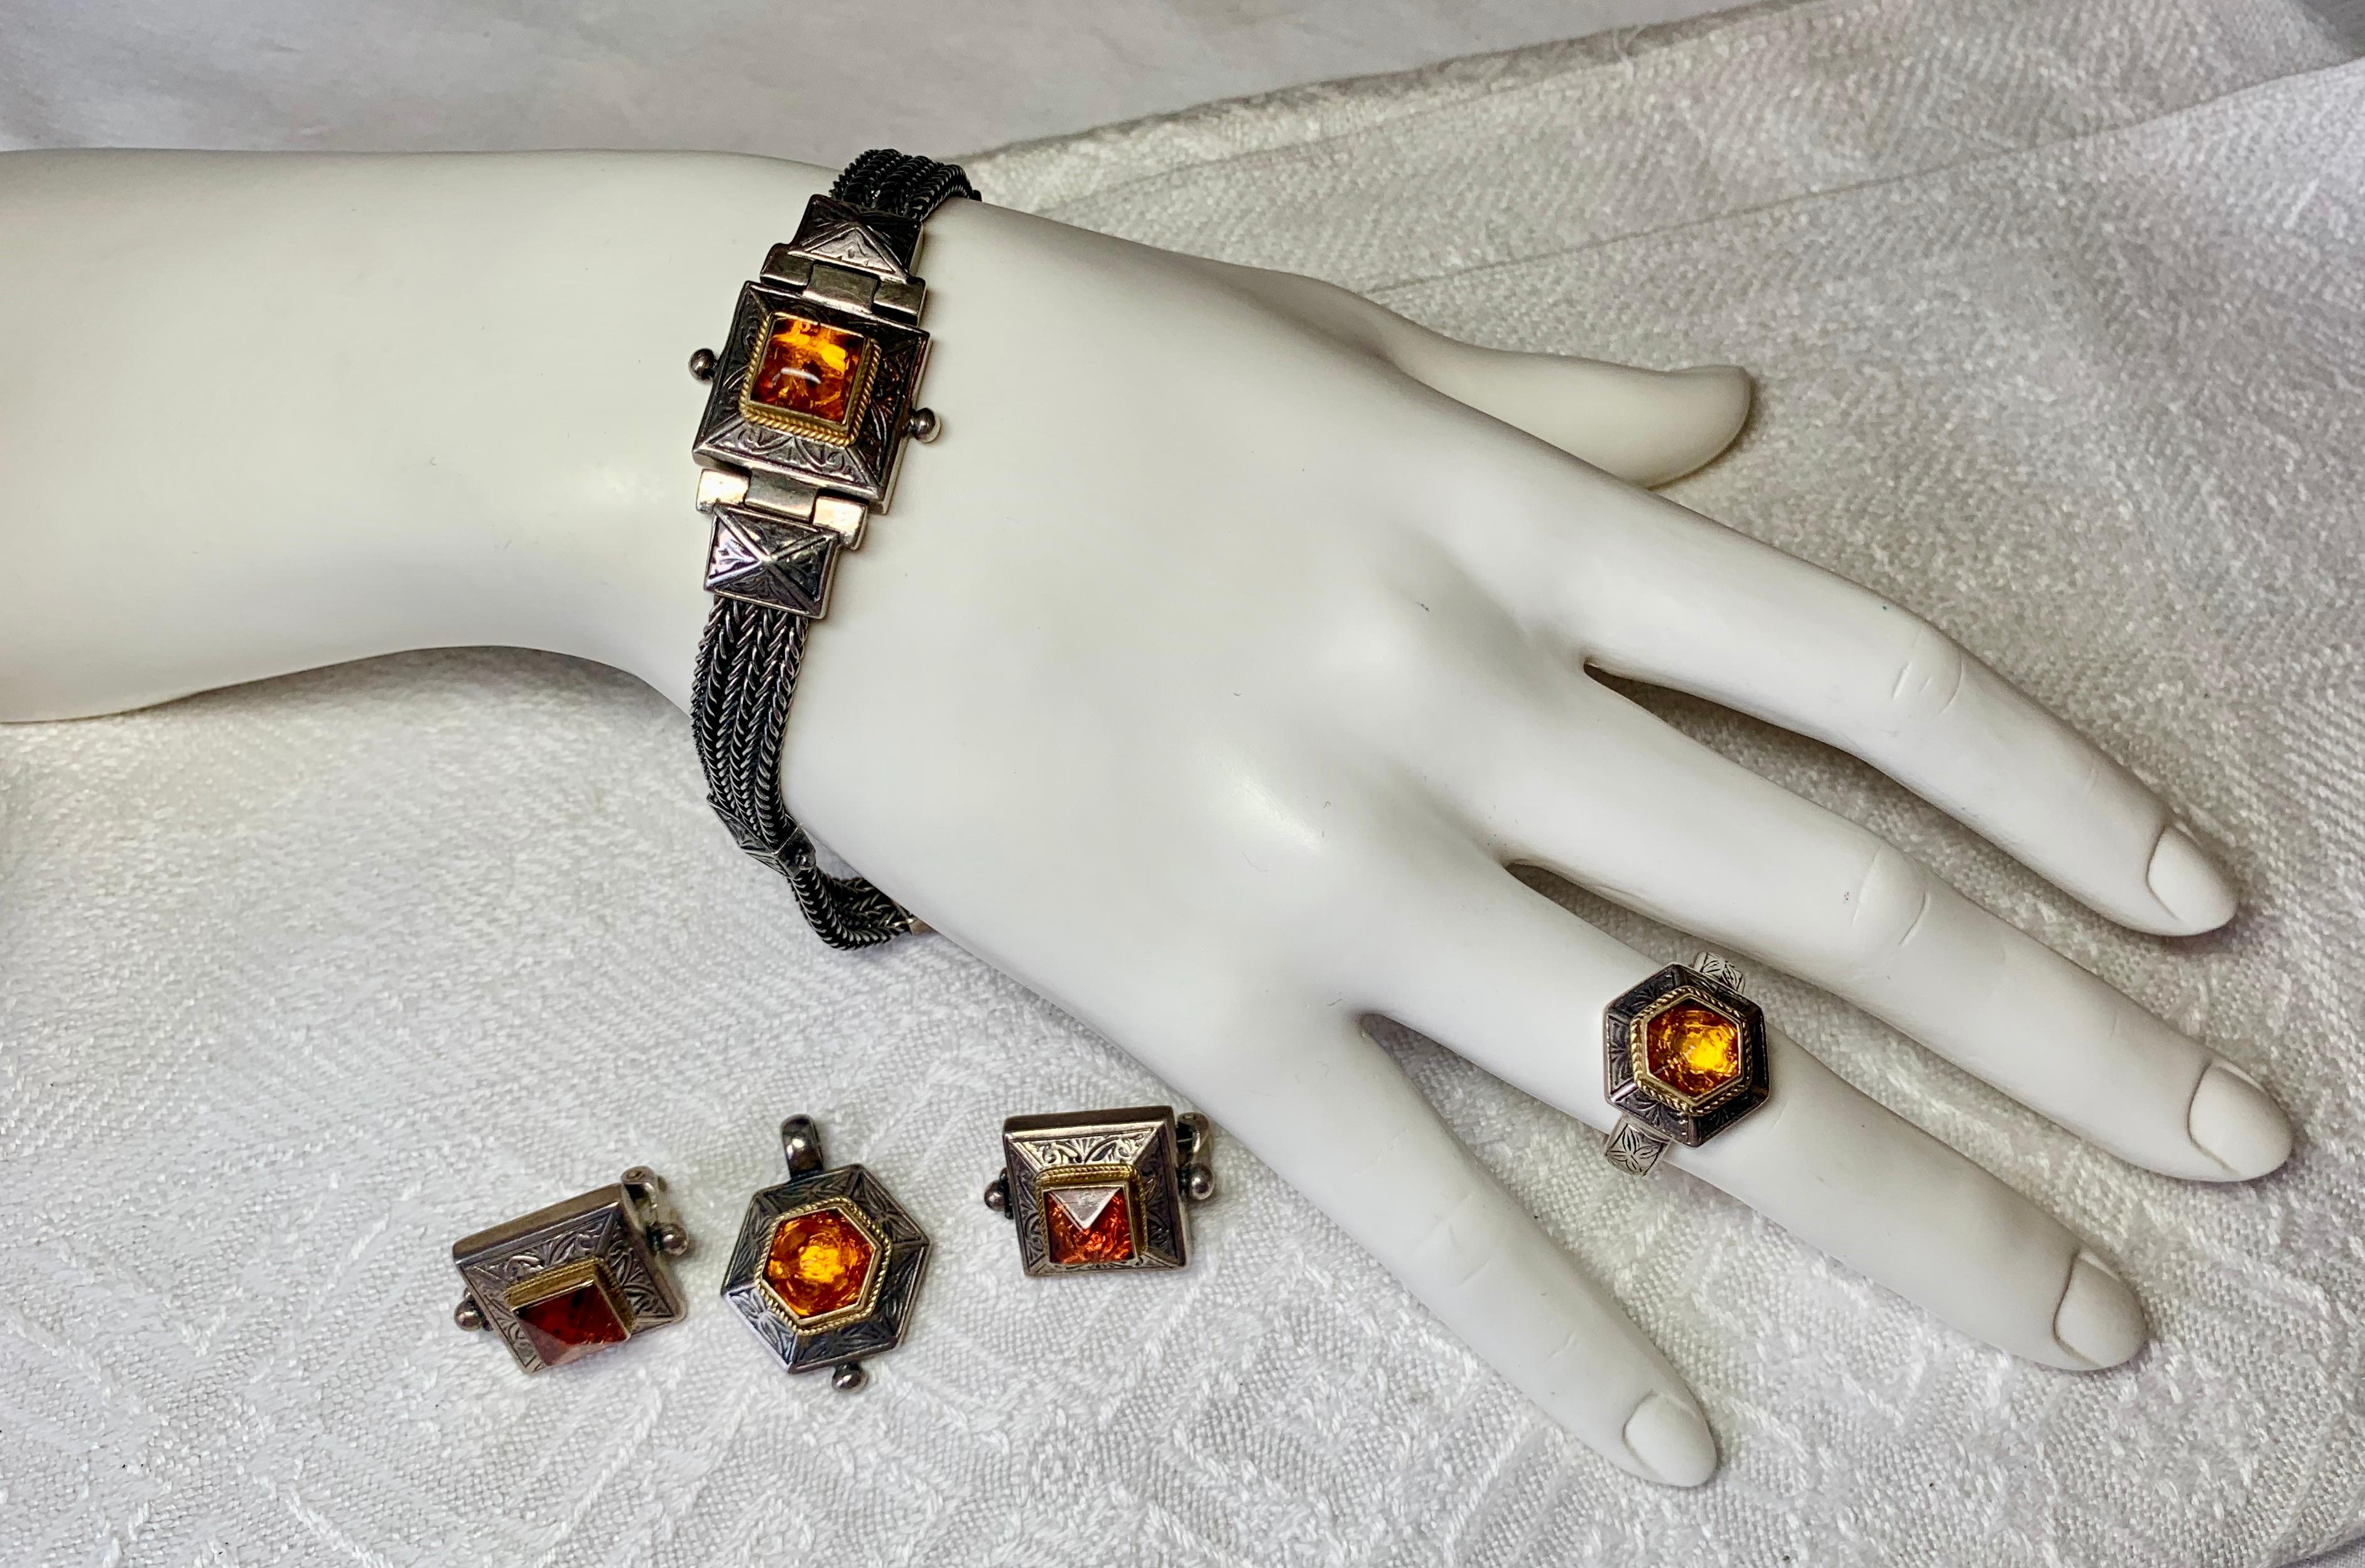 From the esteemed Greek Designer SAVATI, we have a stunning and rare Amber, 22 Karat Gold, Sterling Silver suite of jewels comprised of Bracelet, Earrings, Ring and Pendant in the Byzantine style.  SAVATI is renowned for their Byzantine inspired